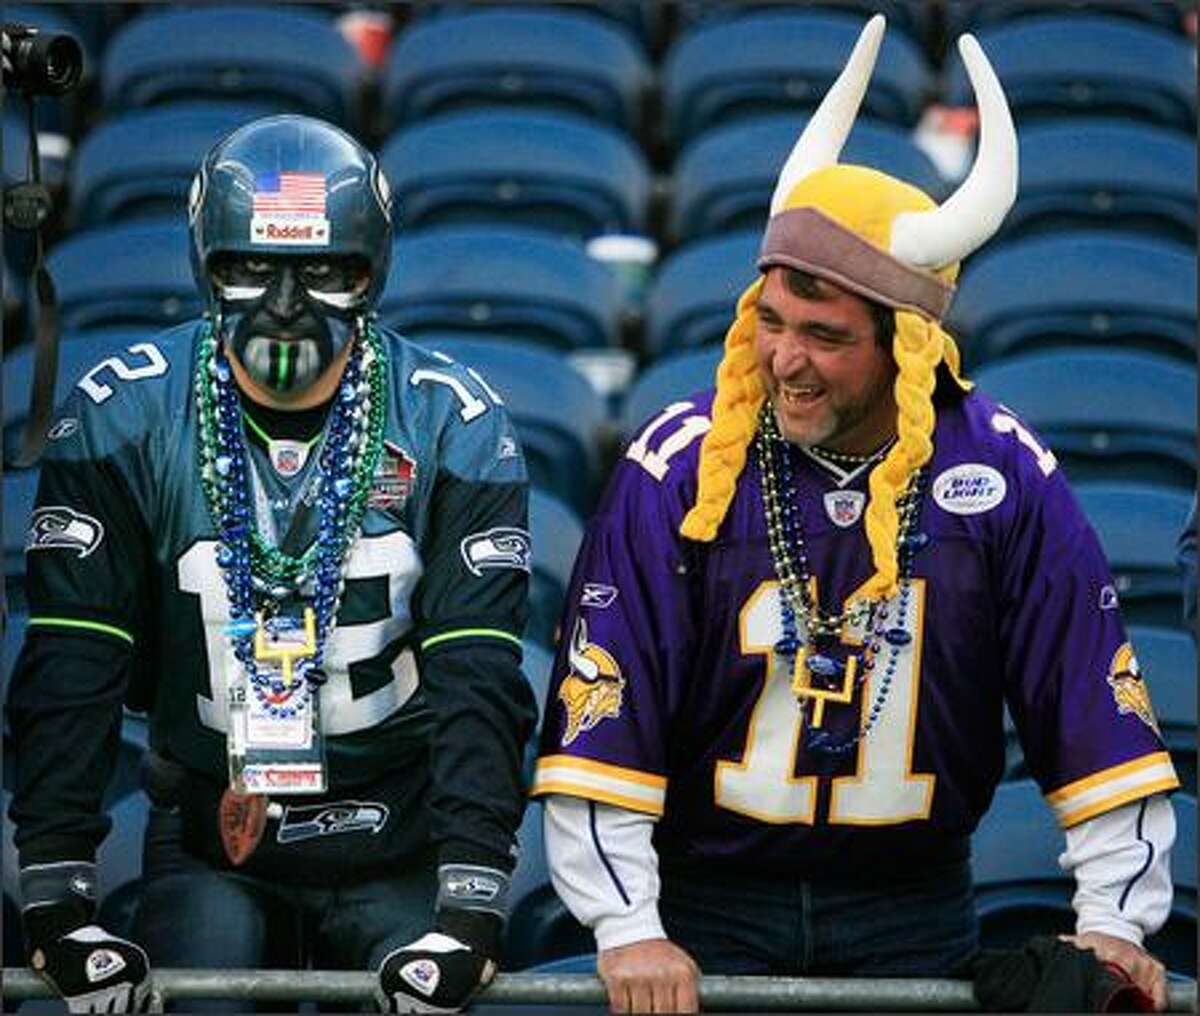 Seahawks fan Brad "Cannonball" Carter of Sumner glowers after the game, while Everett's Mark Gifford yuks it up after his Vikings' 31-3 victory Sunday.